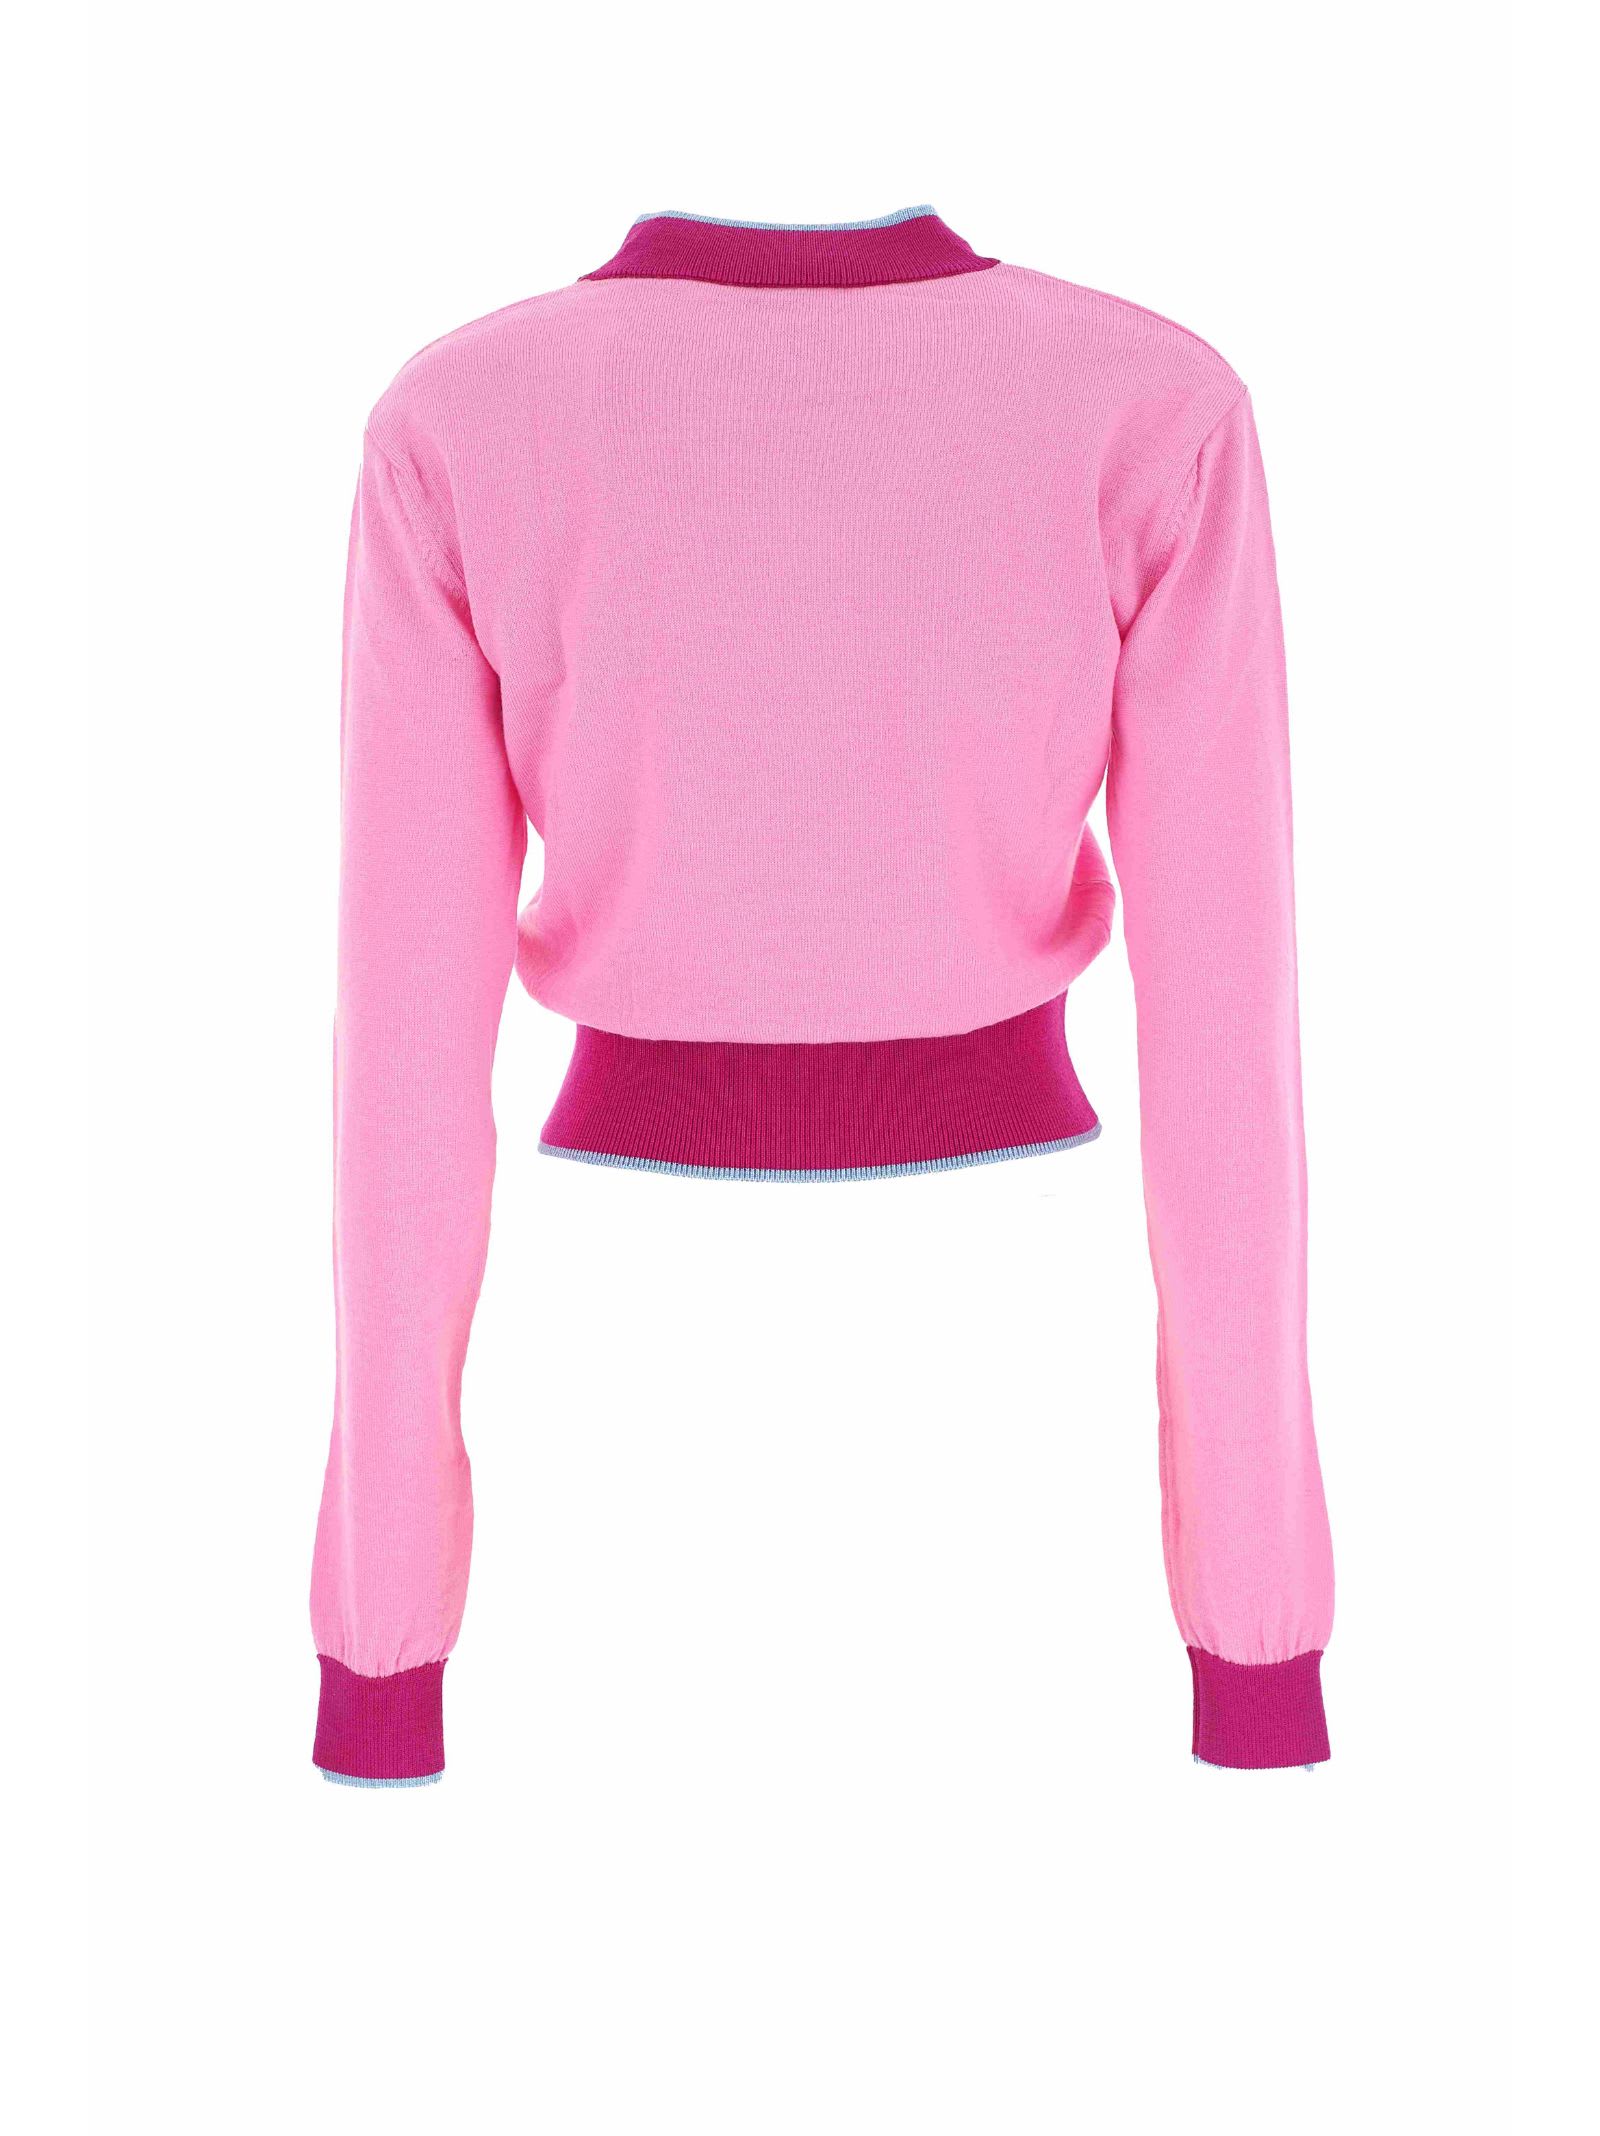 Shop Versace Jeans Couture Sweaters Pink